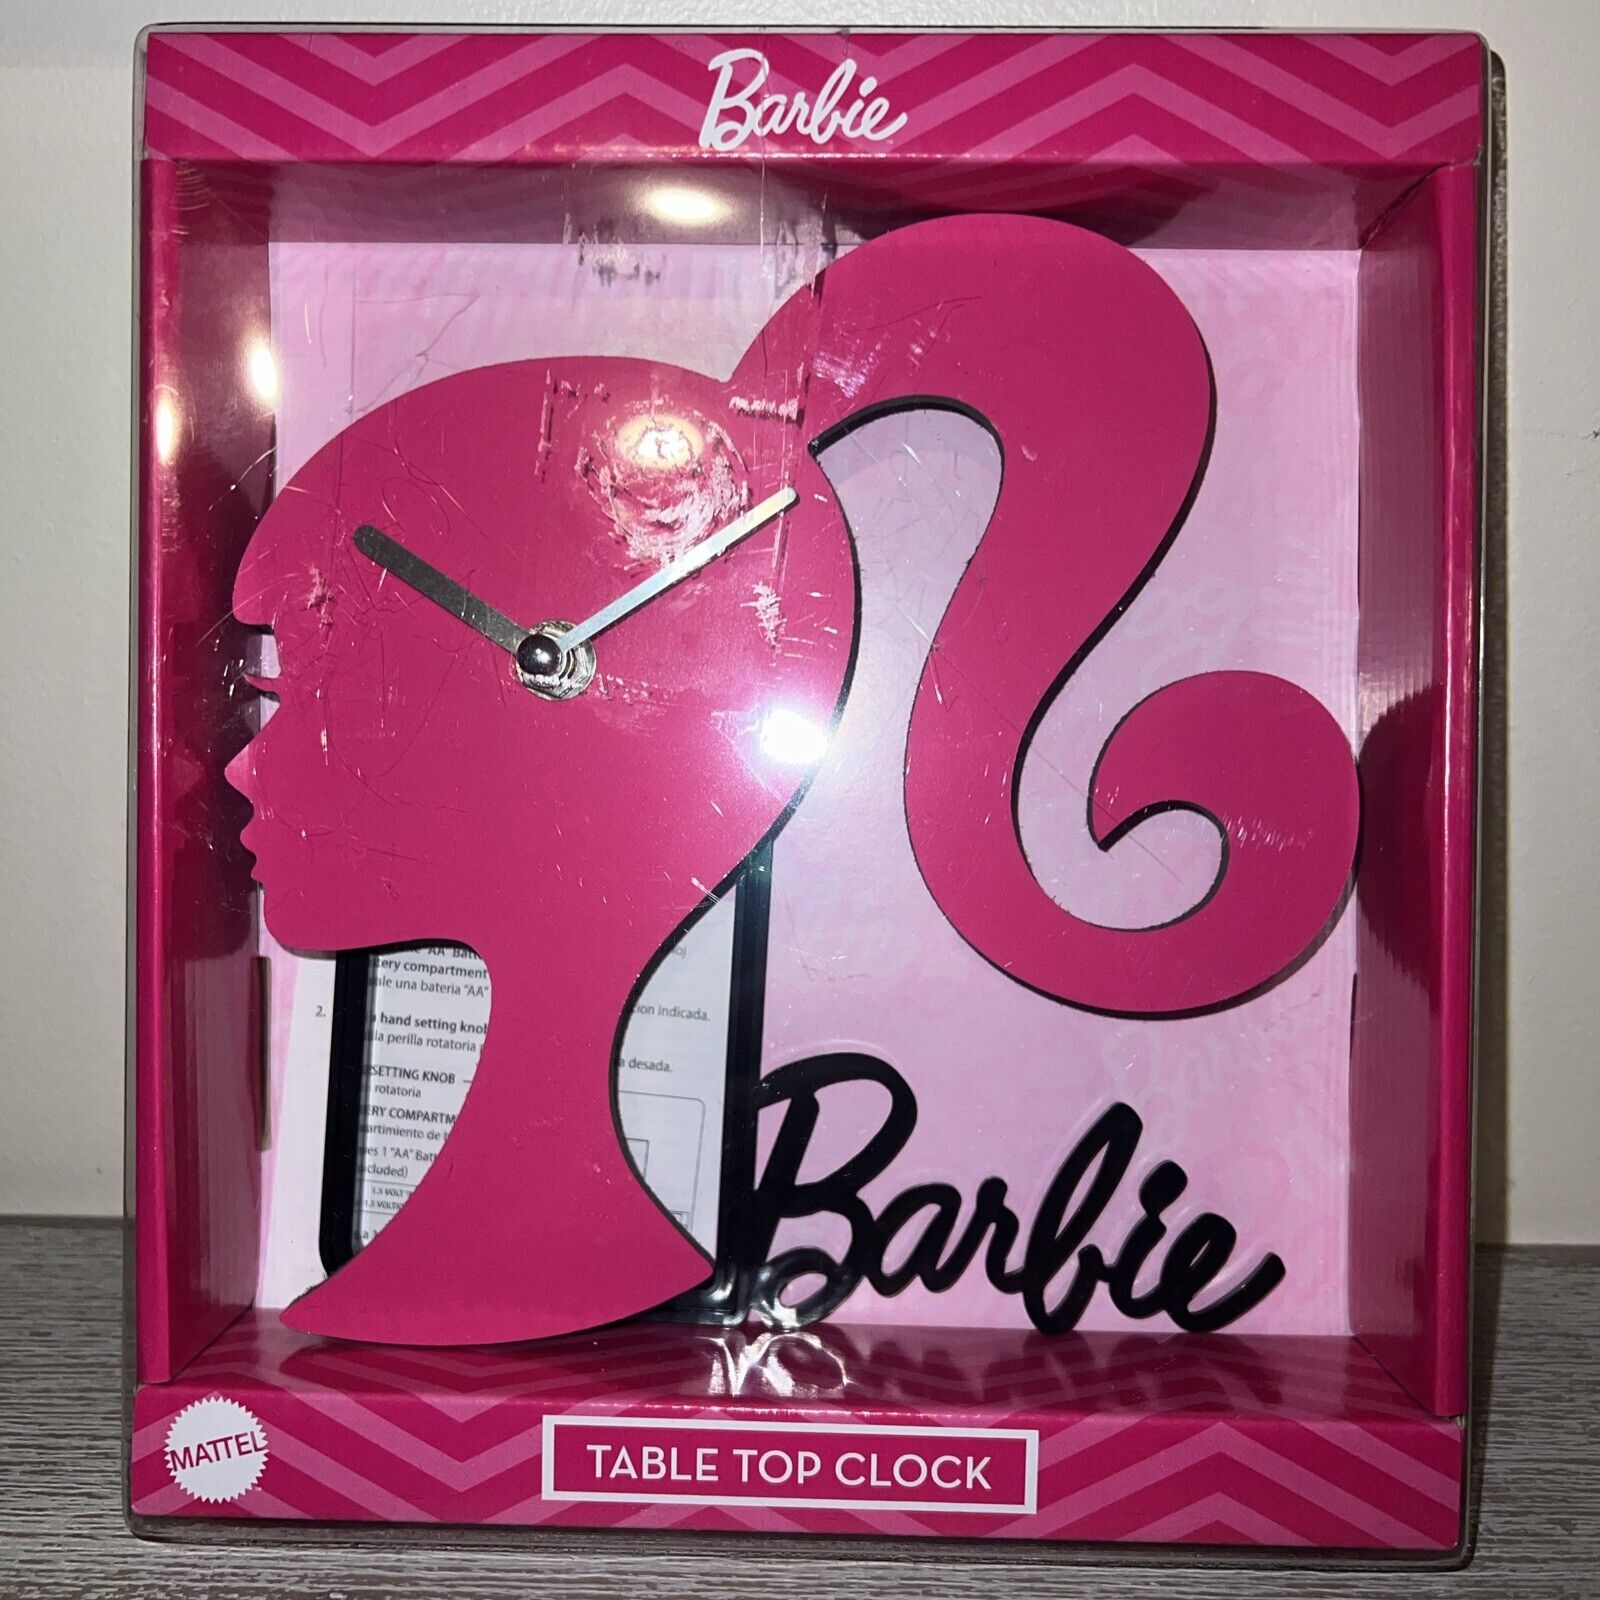 NEW Barbie Silhouette Hot Pink Barbie Table Top Clock